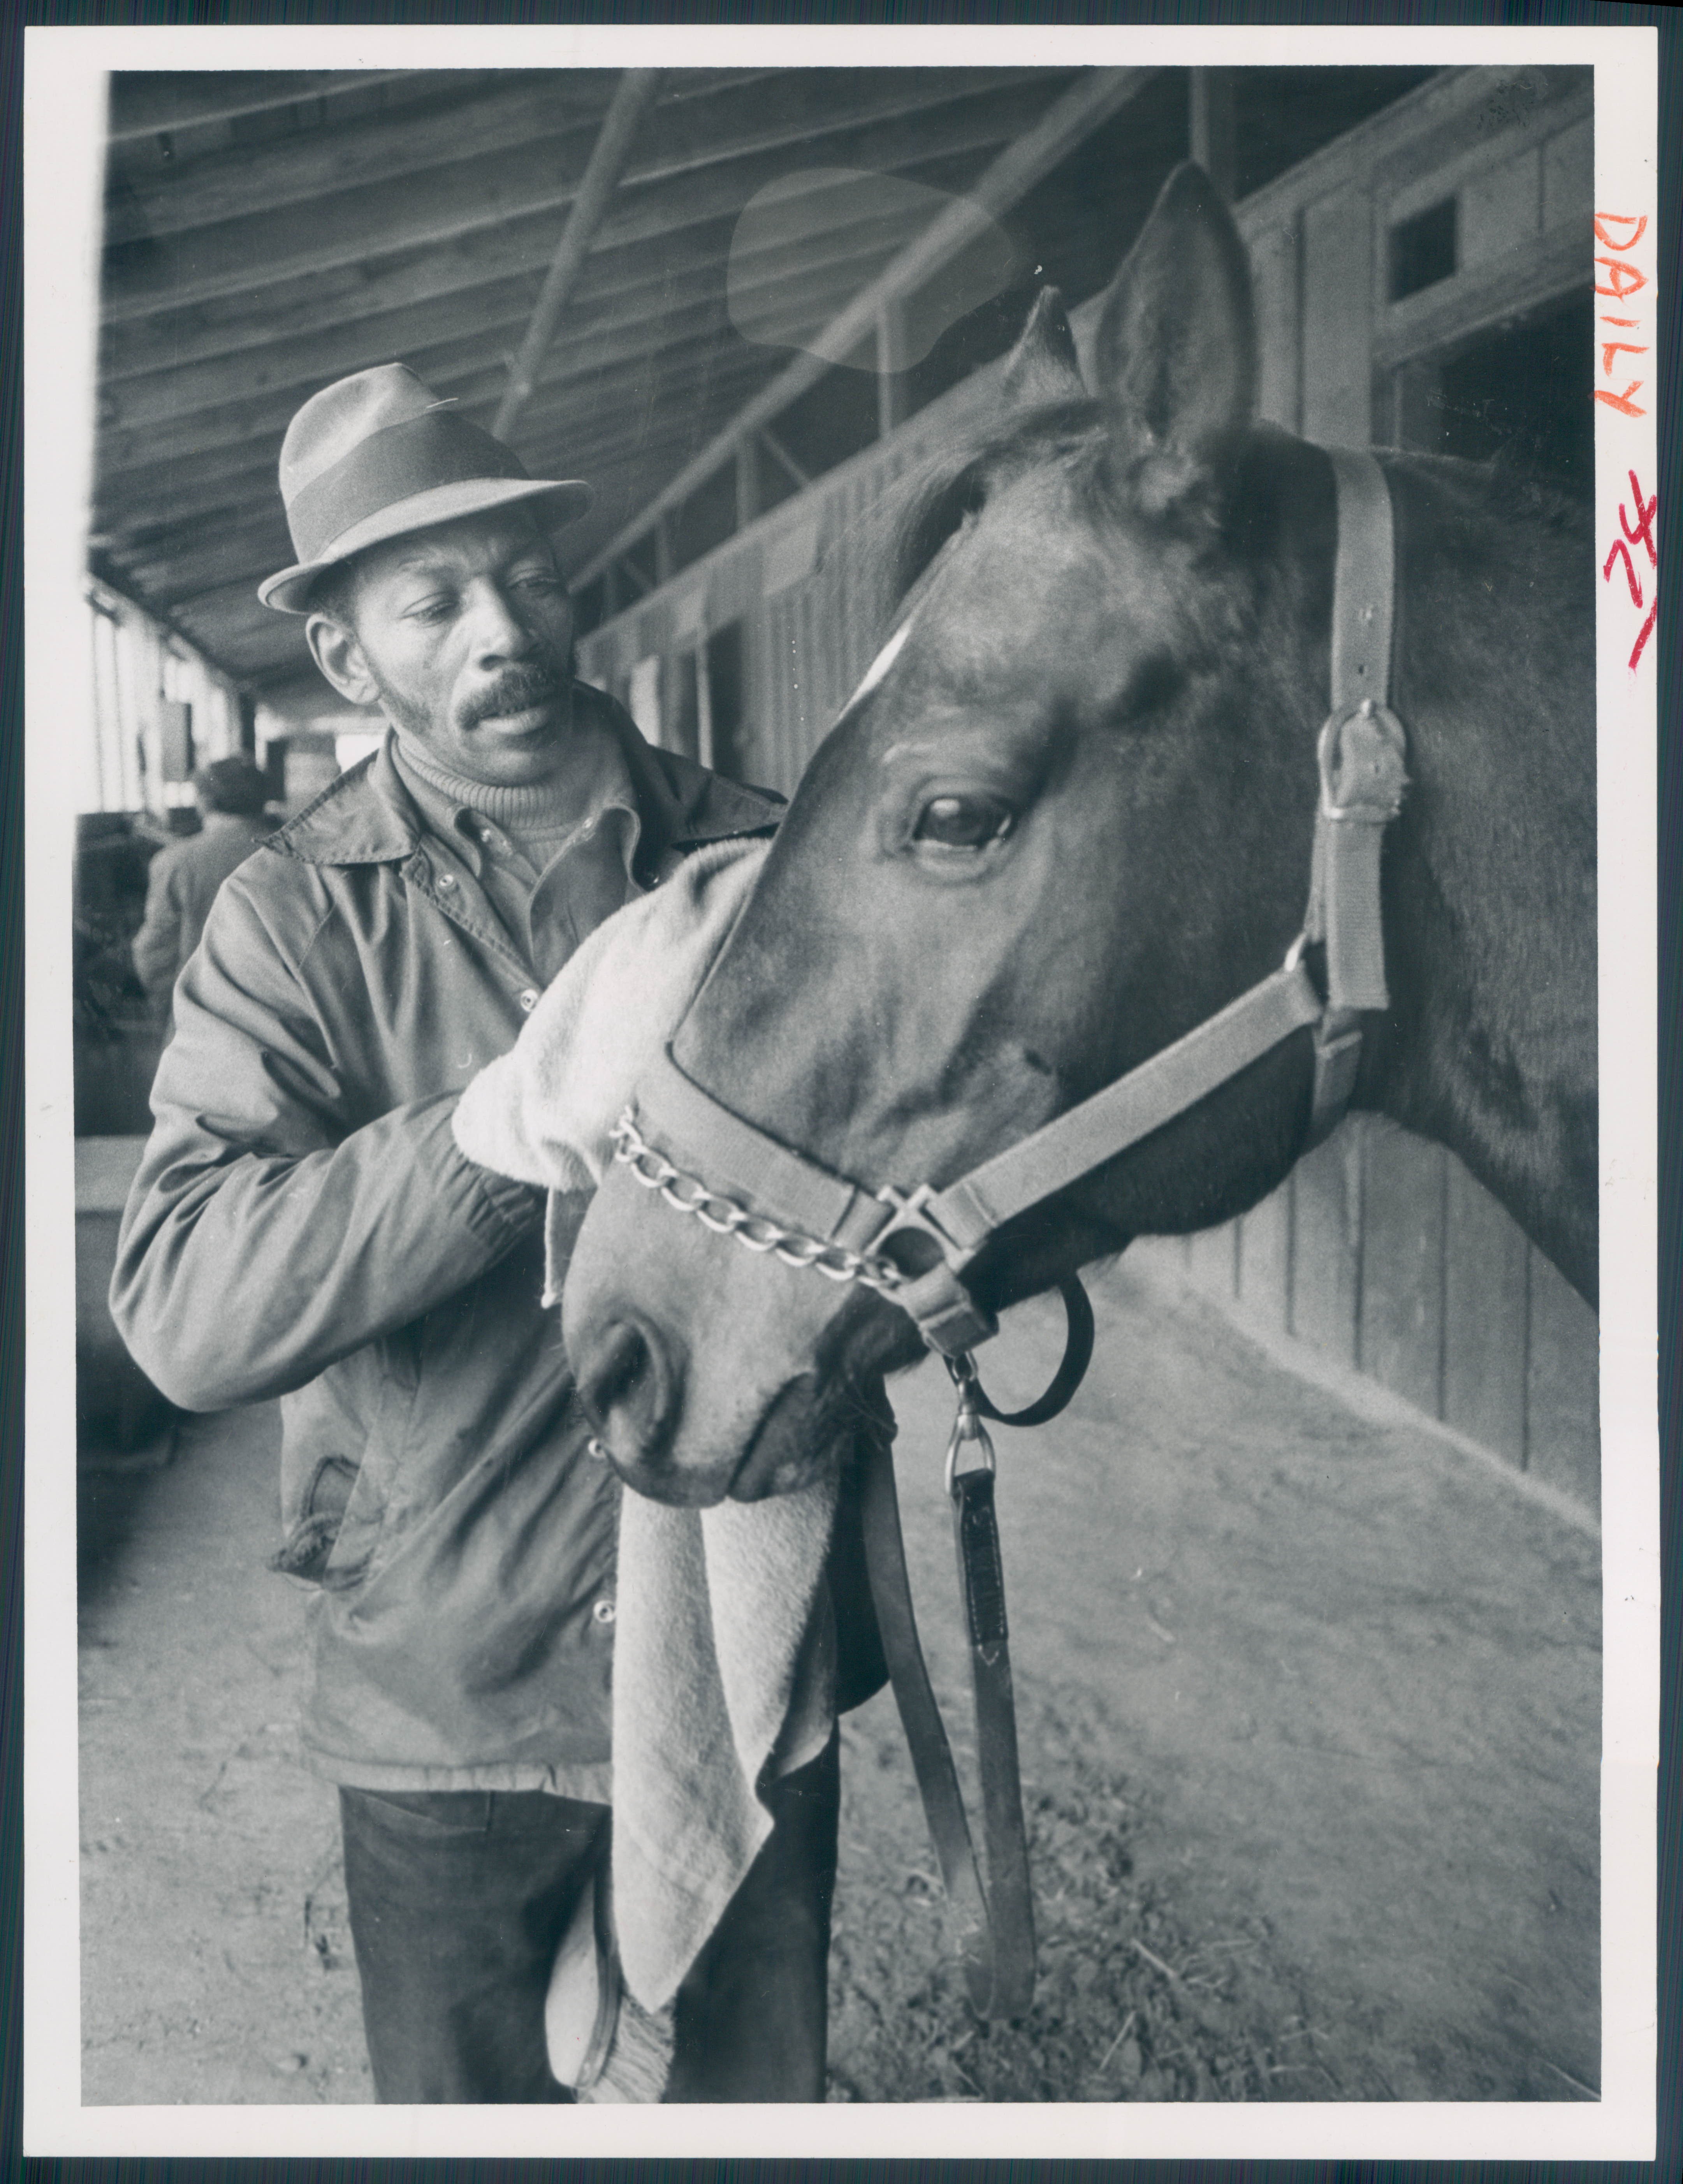 January 8, 1976 - Chester Moore and one of his horses, San Sunset. Photo by Walter M. McCardell BOH-624-BSDate Created: 1976-01-08 Copyright Notice: Baltimore Sun Folder Description: Moore, Chester Folder Extended Description: Moore, Chester Title: MOORE CHESTER Subject: MOORE